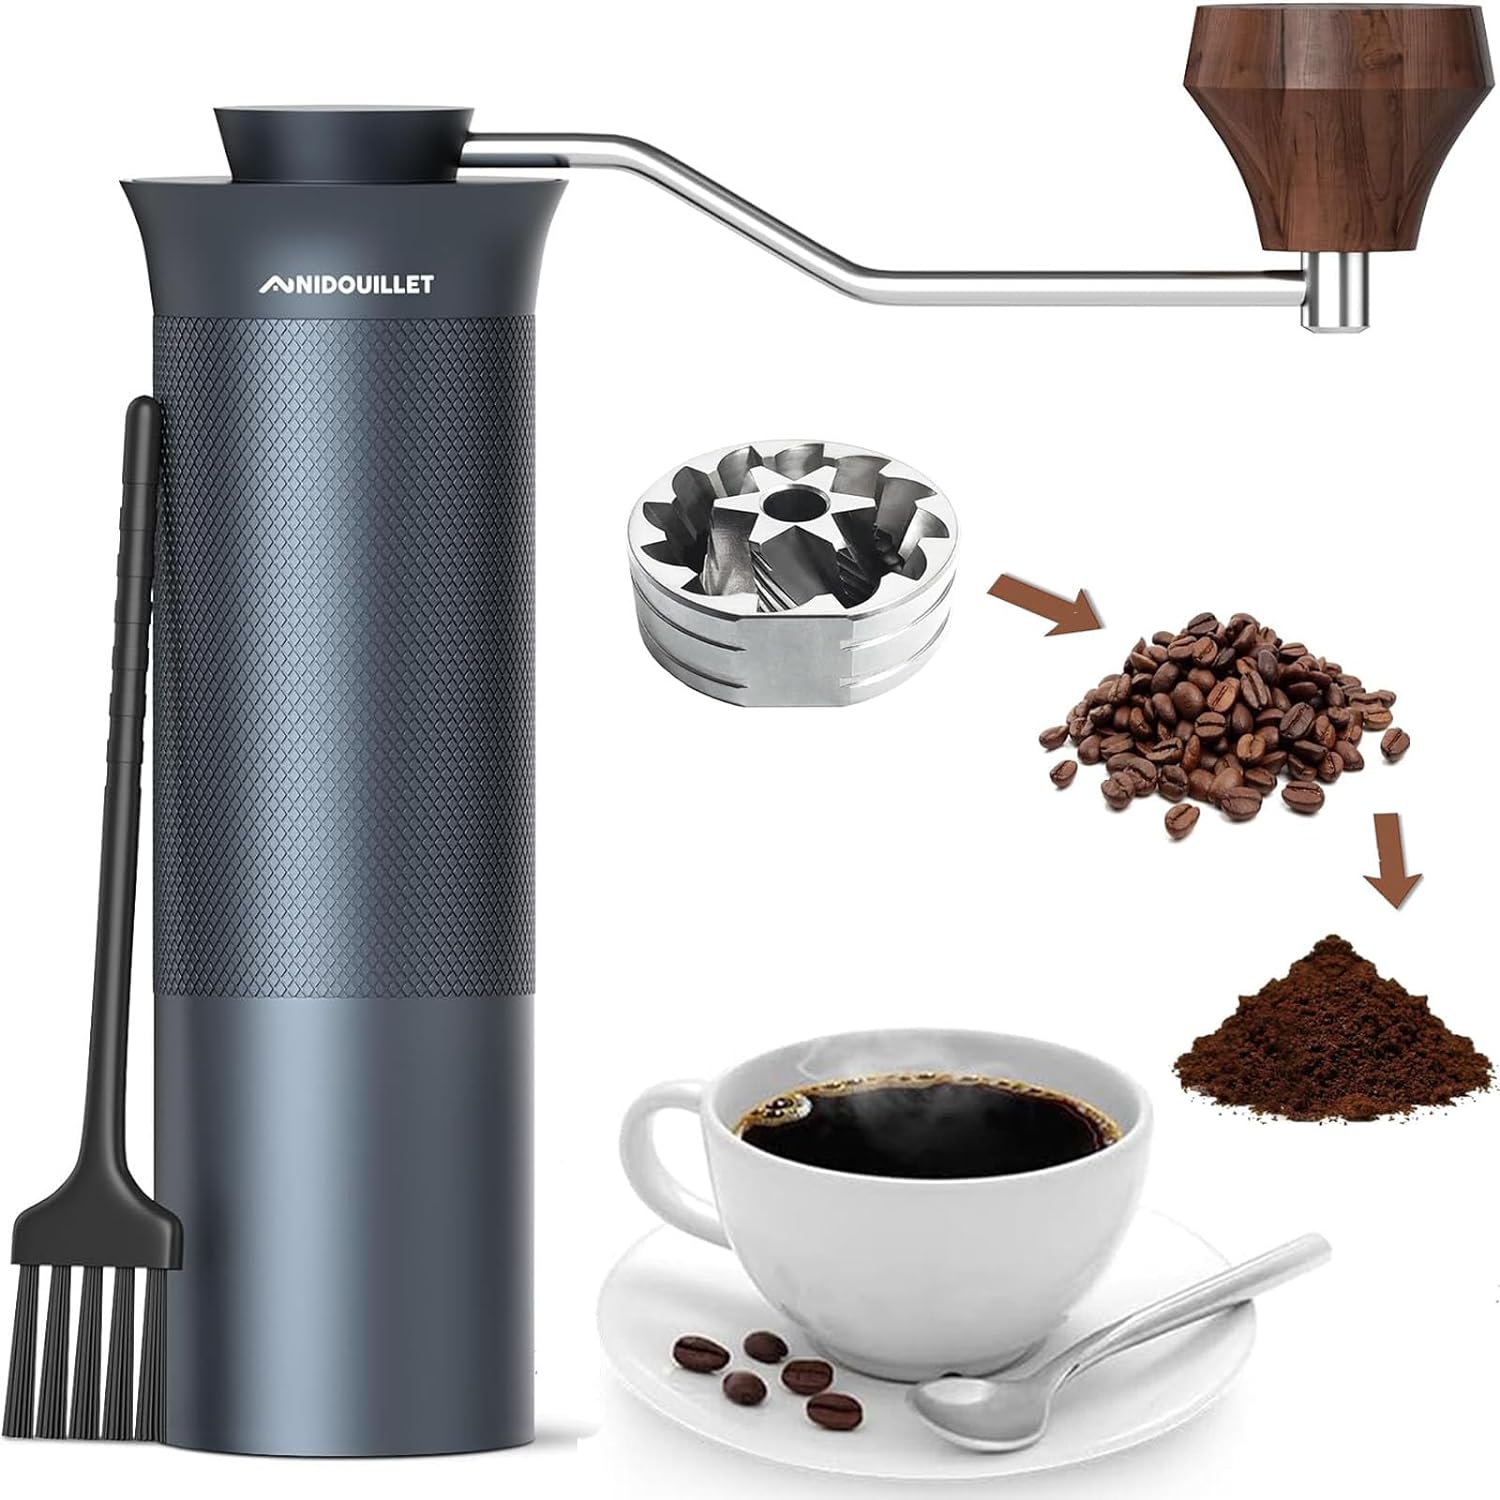 Nidouillet Manual Coffee Grinder with Six Axis CNC Stainless Steel Conical Burr, Hand Coffee Grinder Capacity 30g, Adjustable Setting Double Bearing Manual Coffee Bean Grinder for Office Home Camping